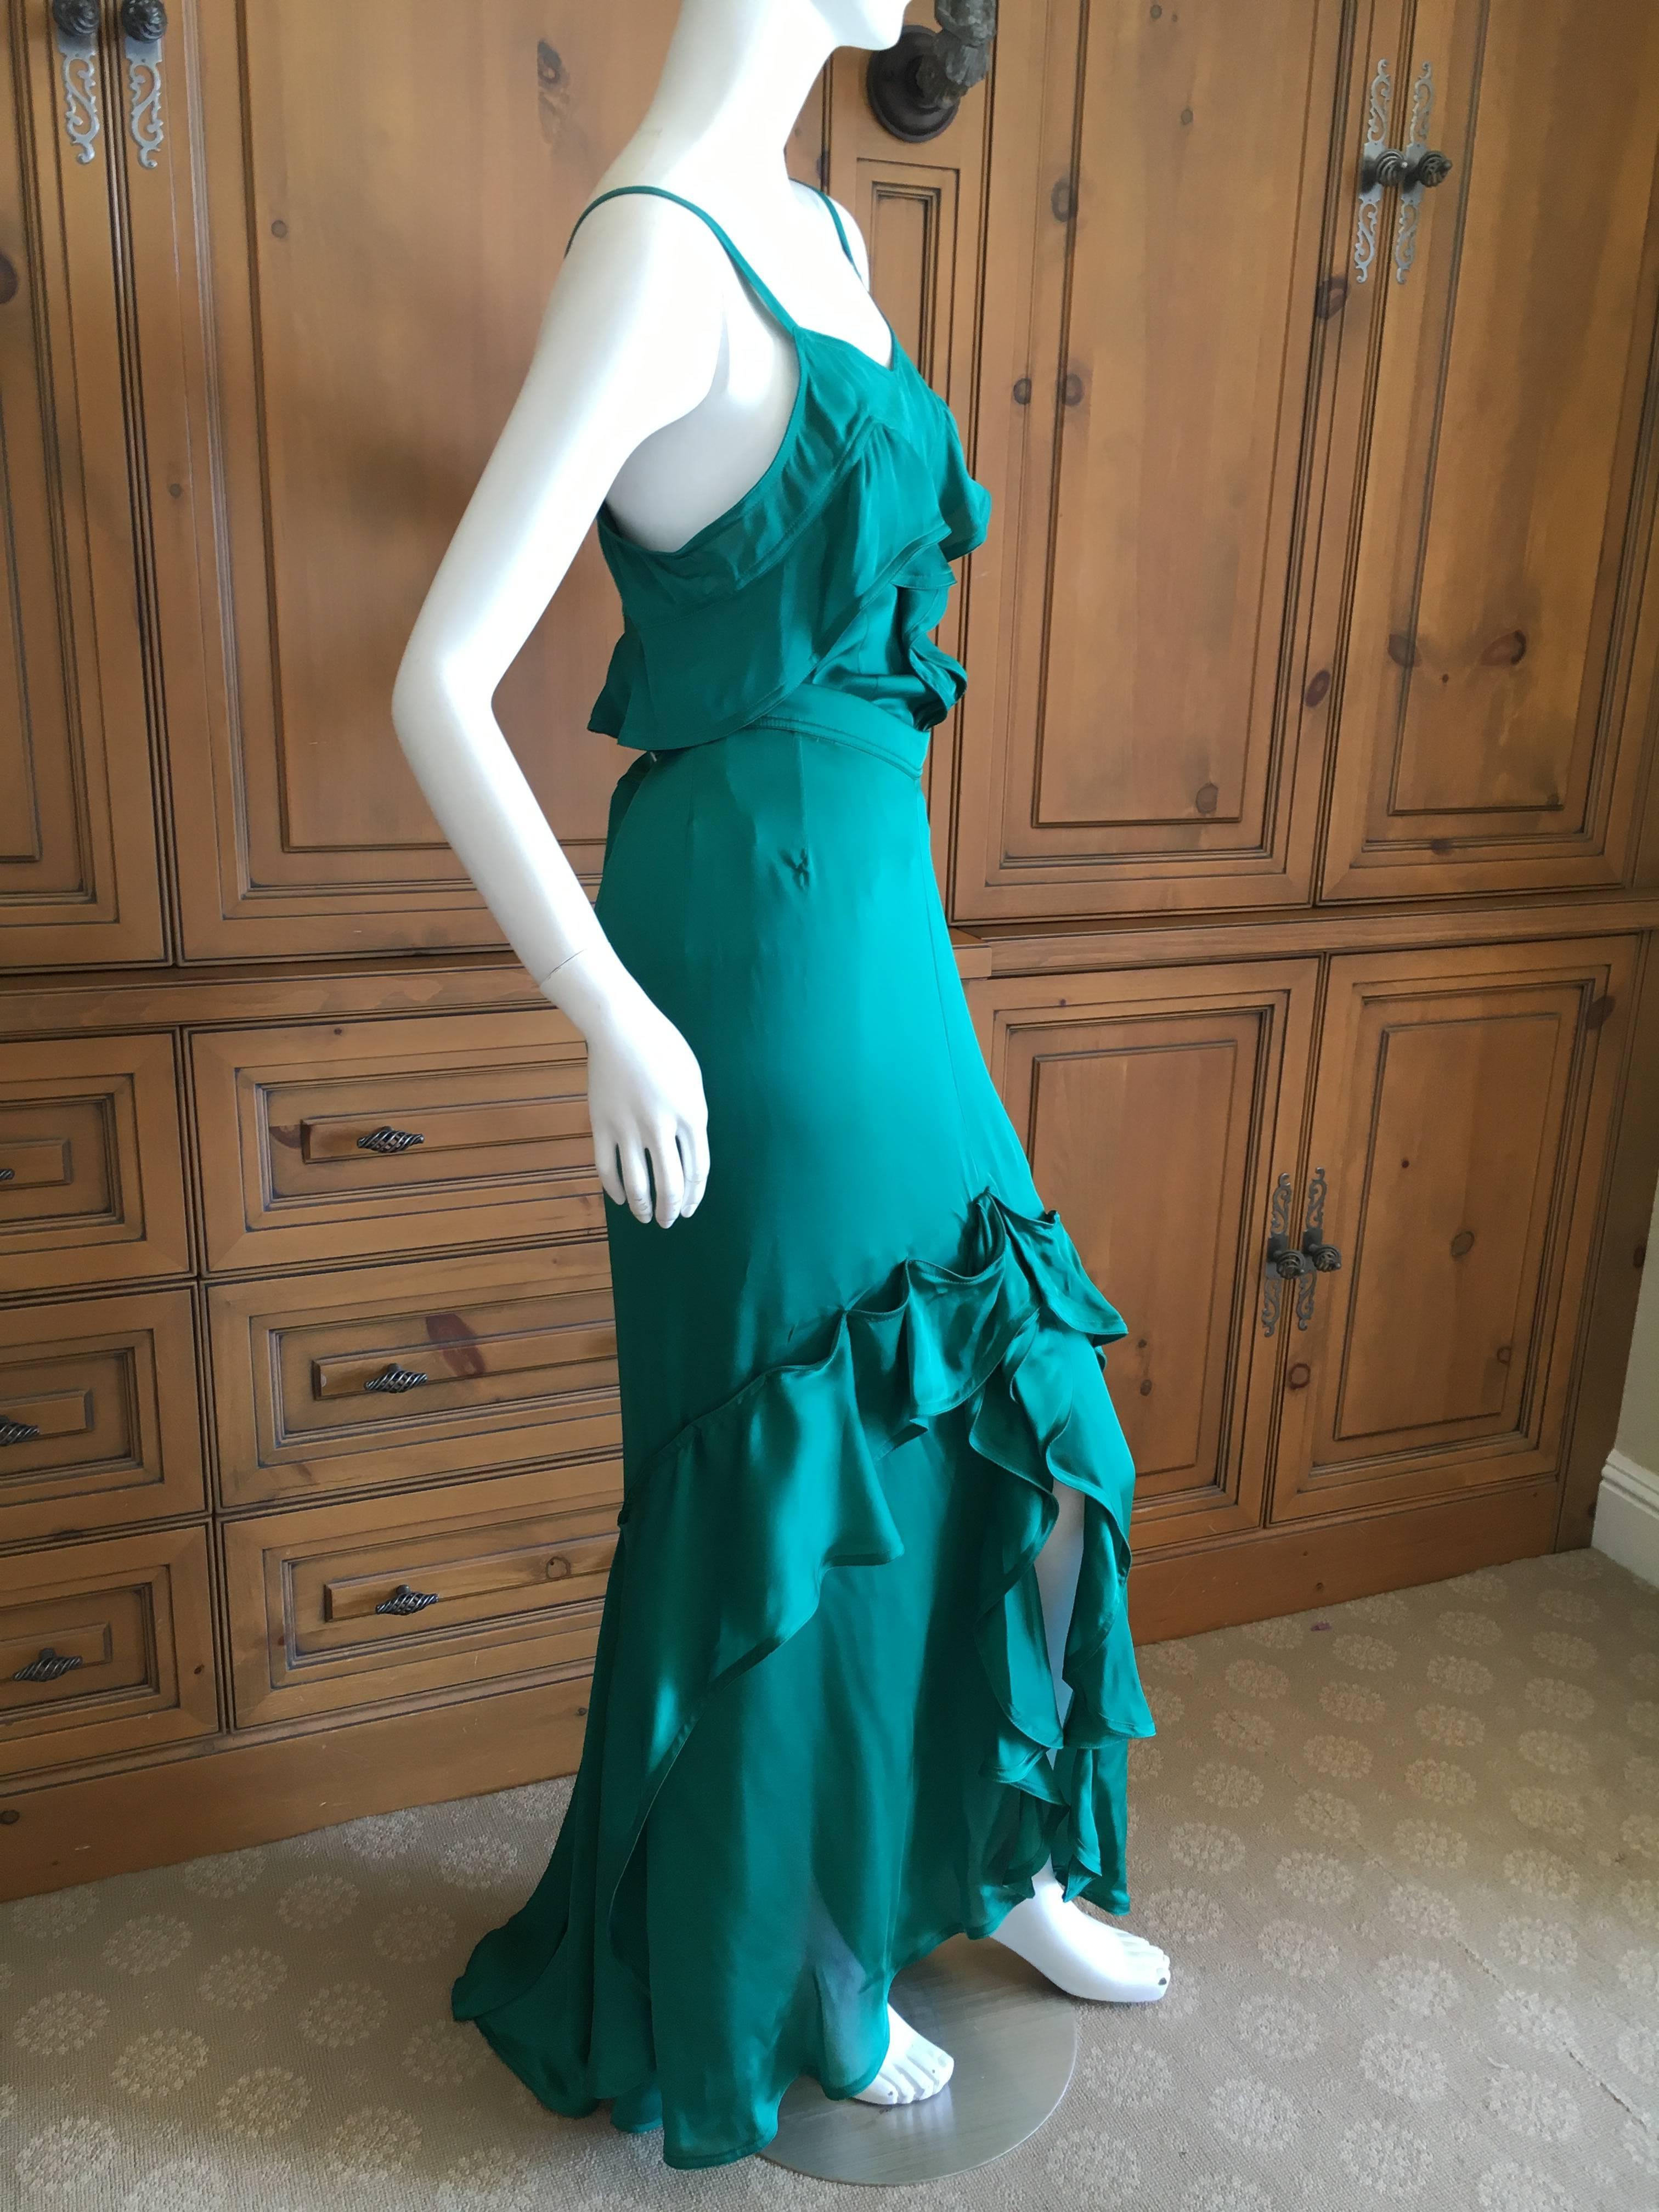 Yves Saint Laurent by Tom Ford 2003 Two Piece Ruffled Silk Dress New with Tags In New Condition For Sale In Cloverdale, CA